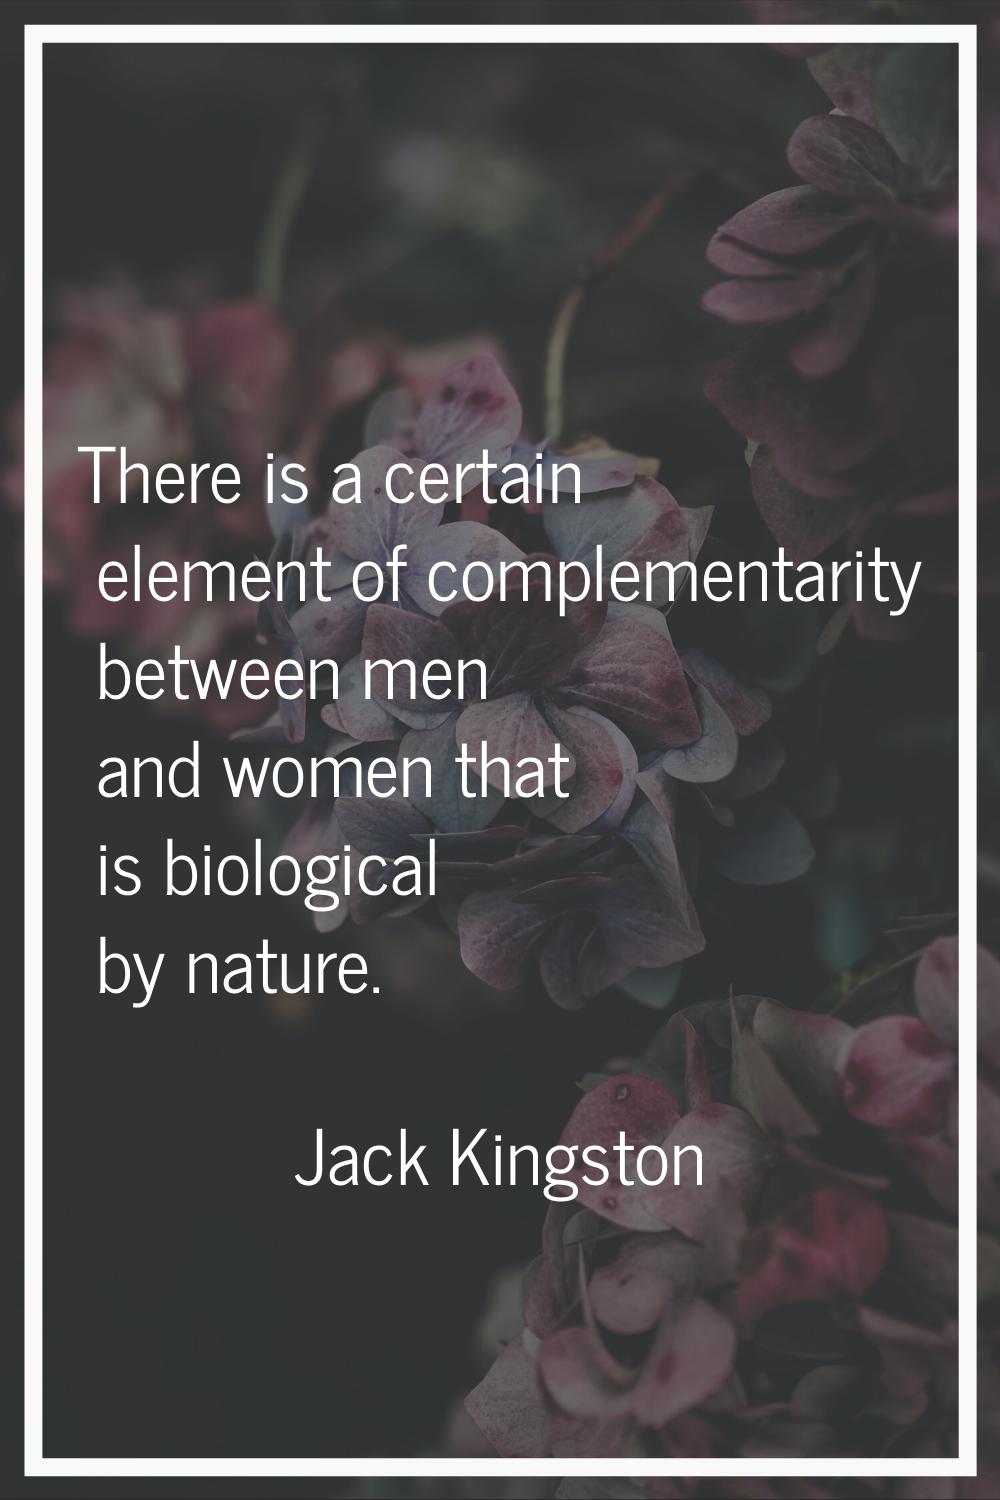 There is a certain element of complementarity between men and women that is biological by nature.